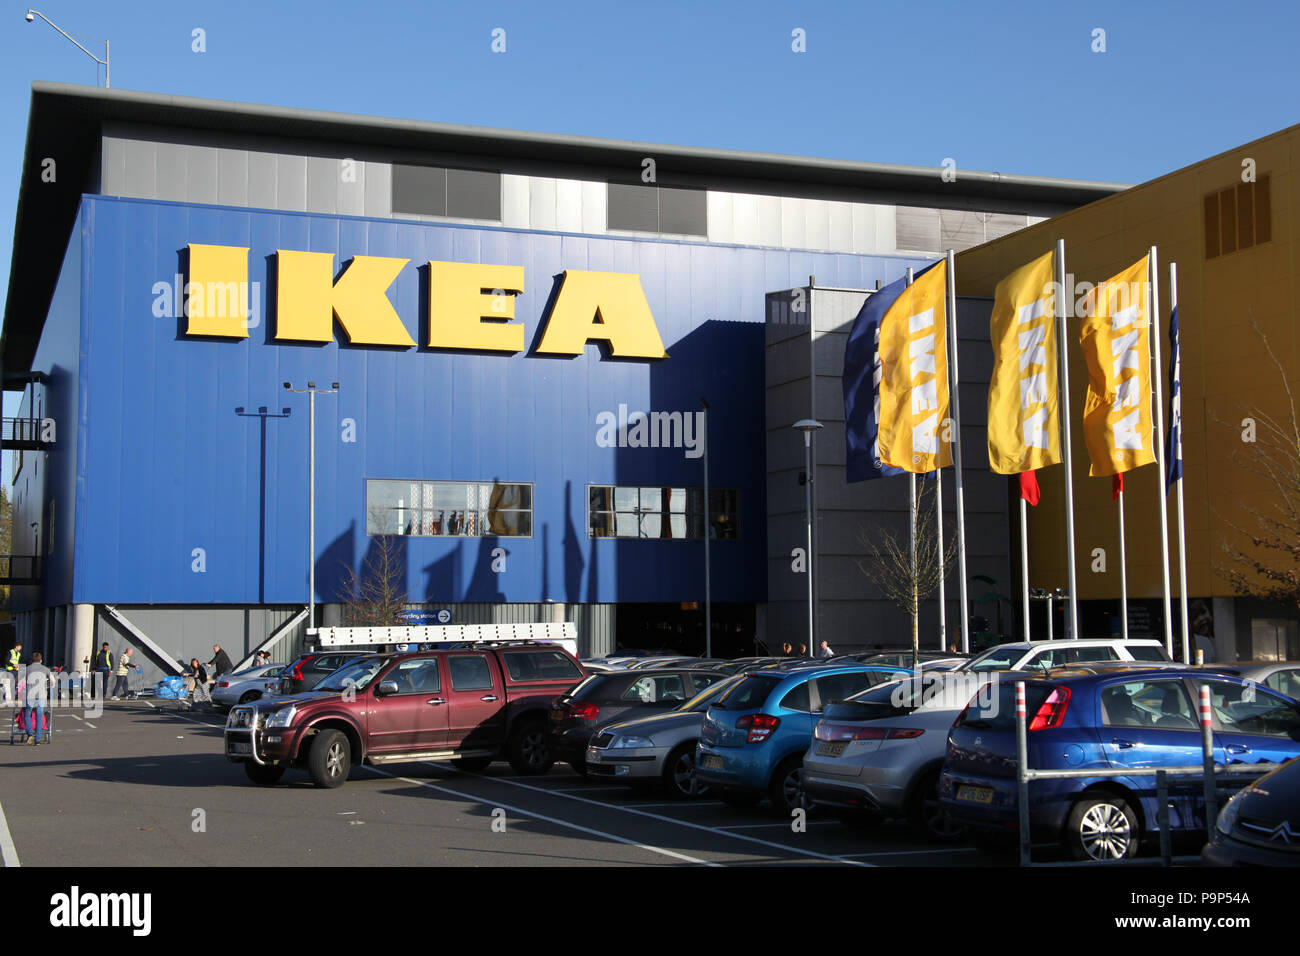 architect Majestueus Boek Ikea Building High Resolution Stock Photography and Images - Alamy